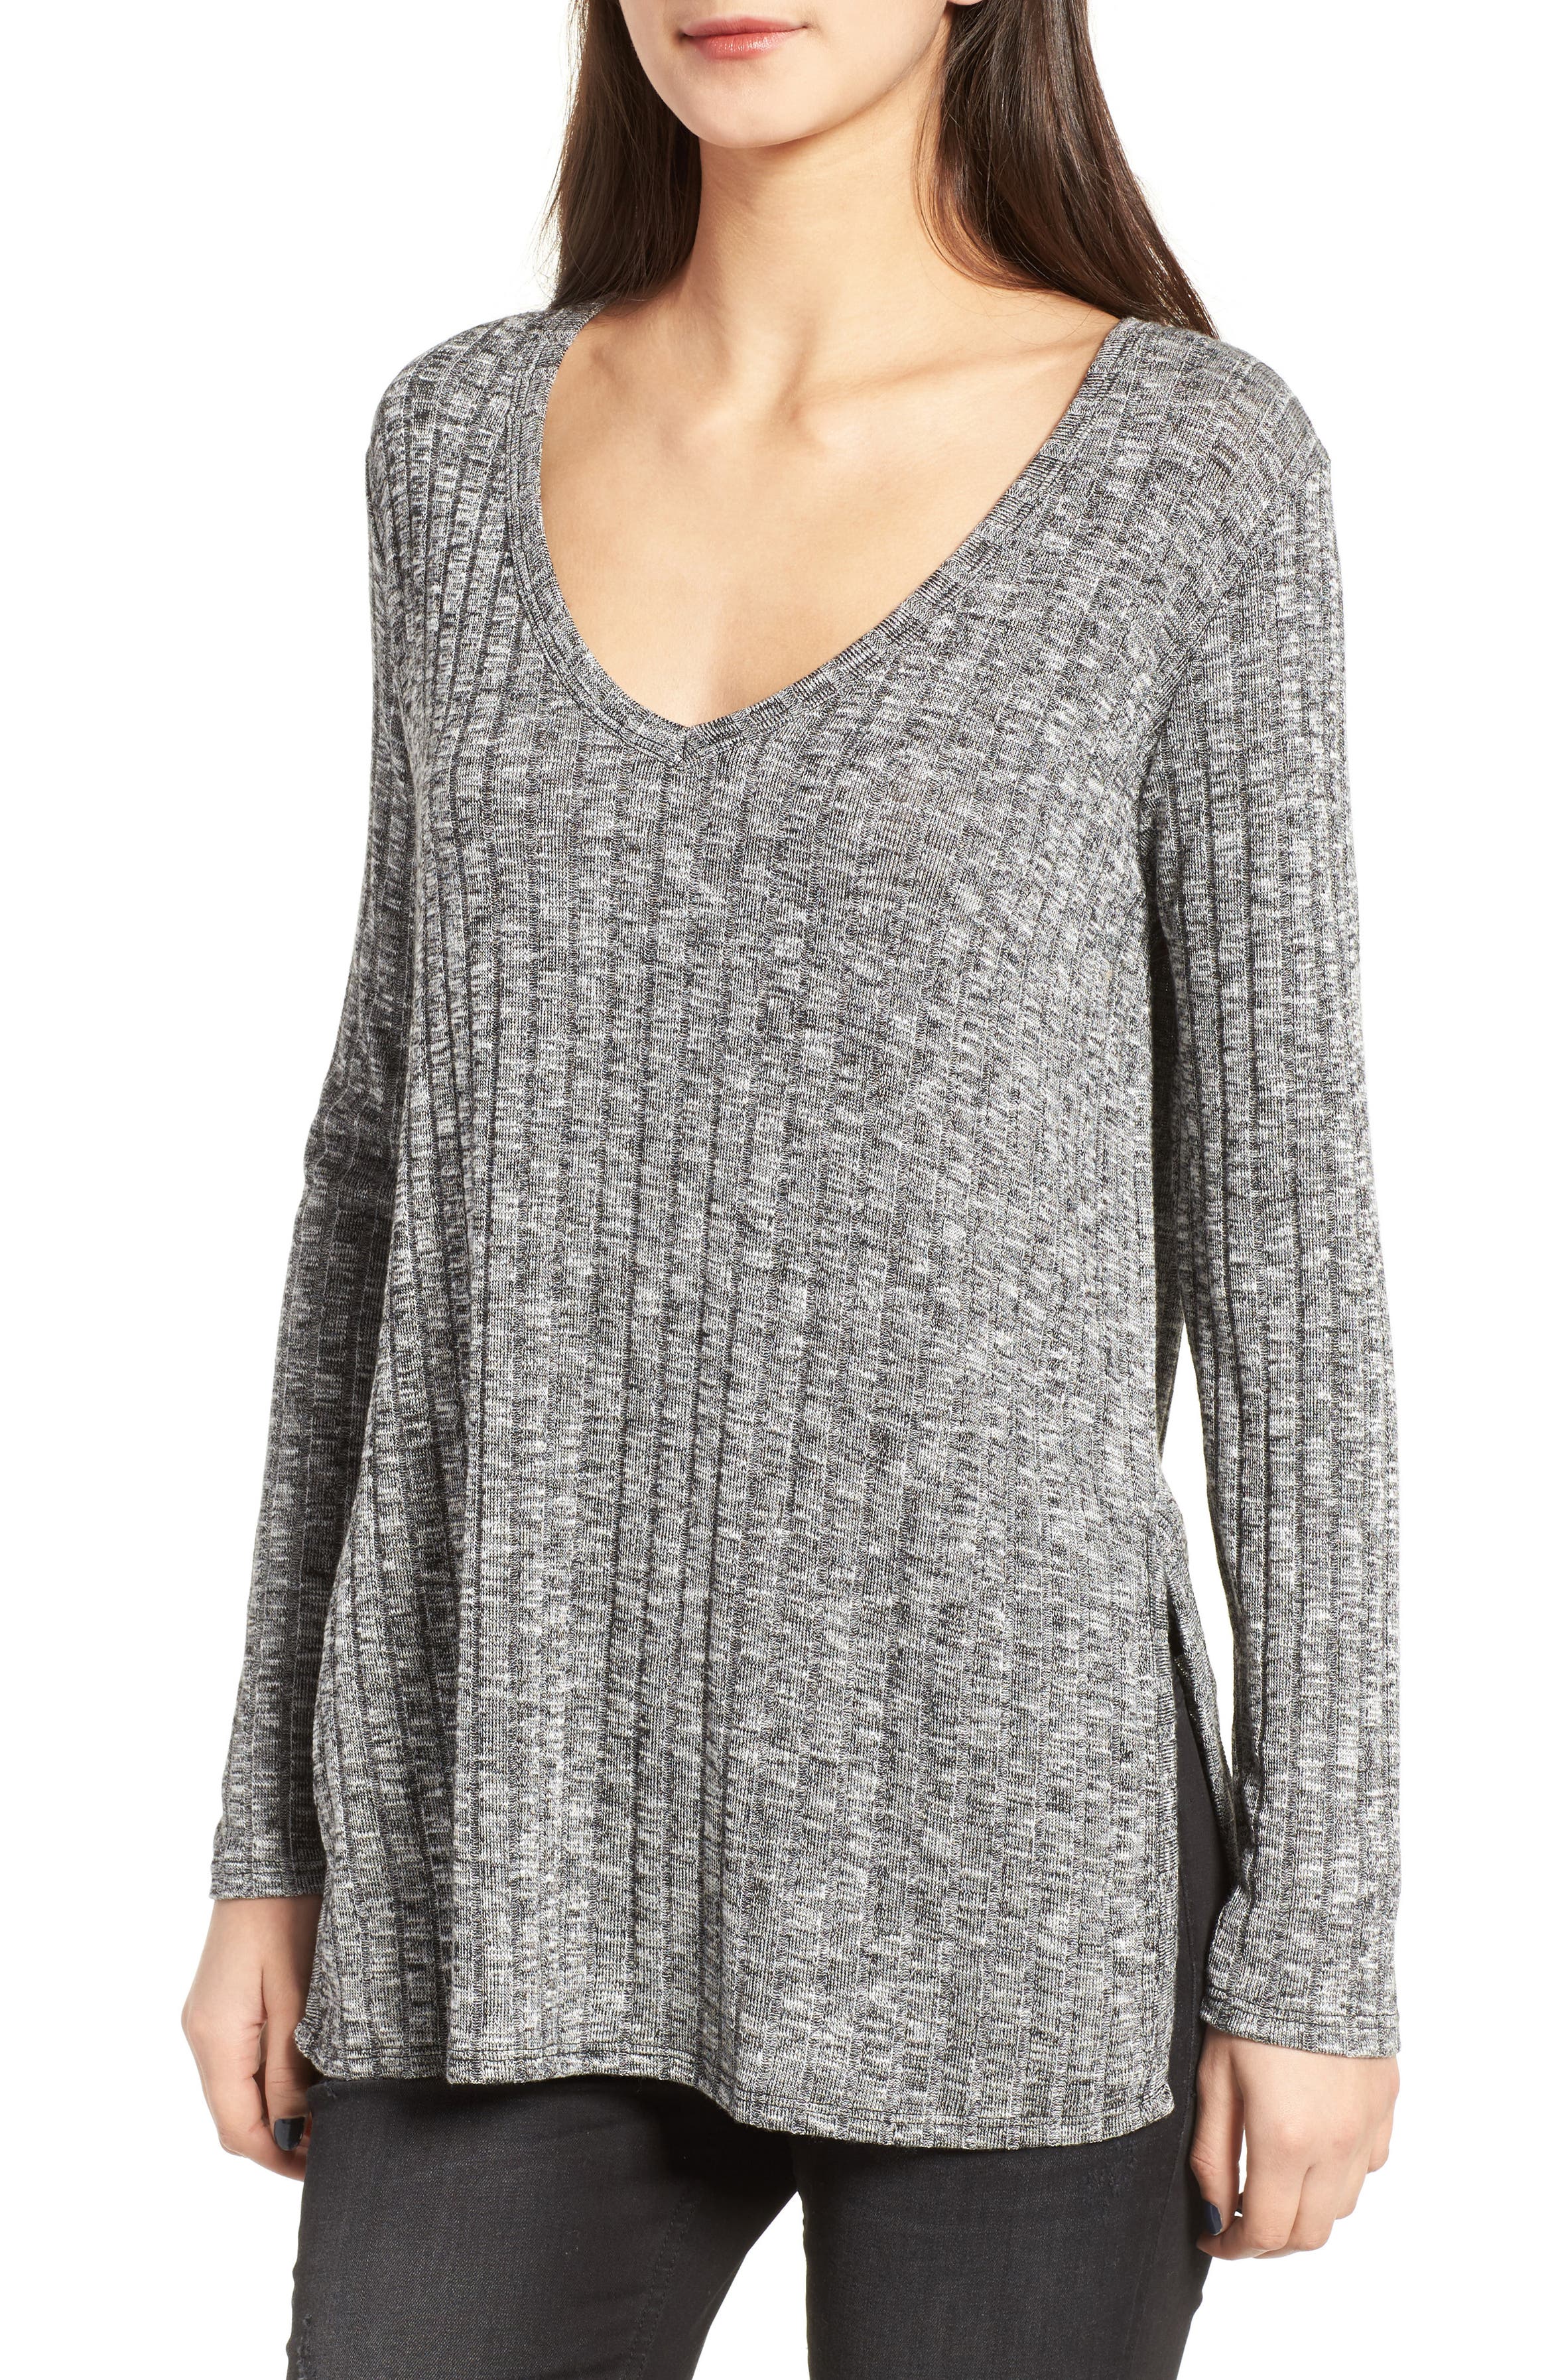 Michelle by Comune Seagraves Pullover | Nordstrom